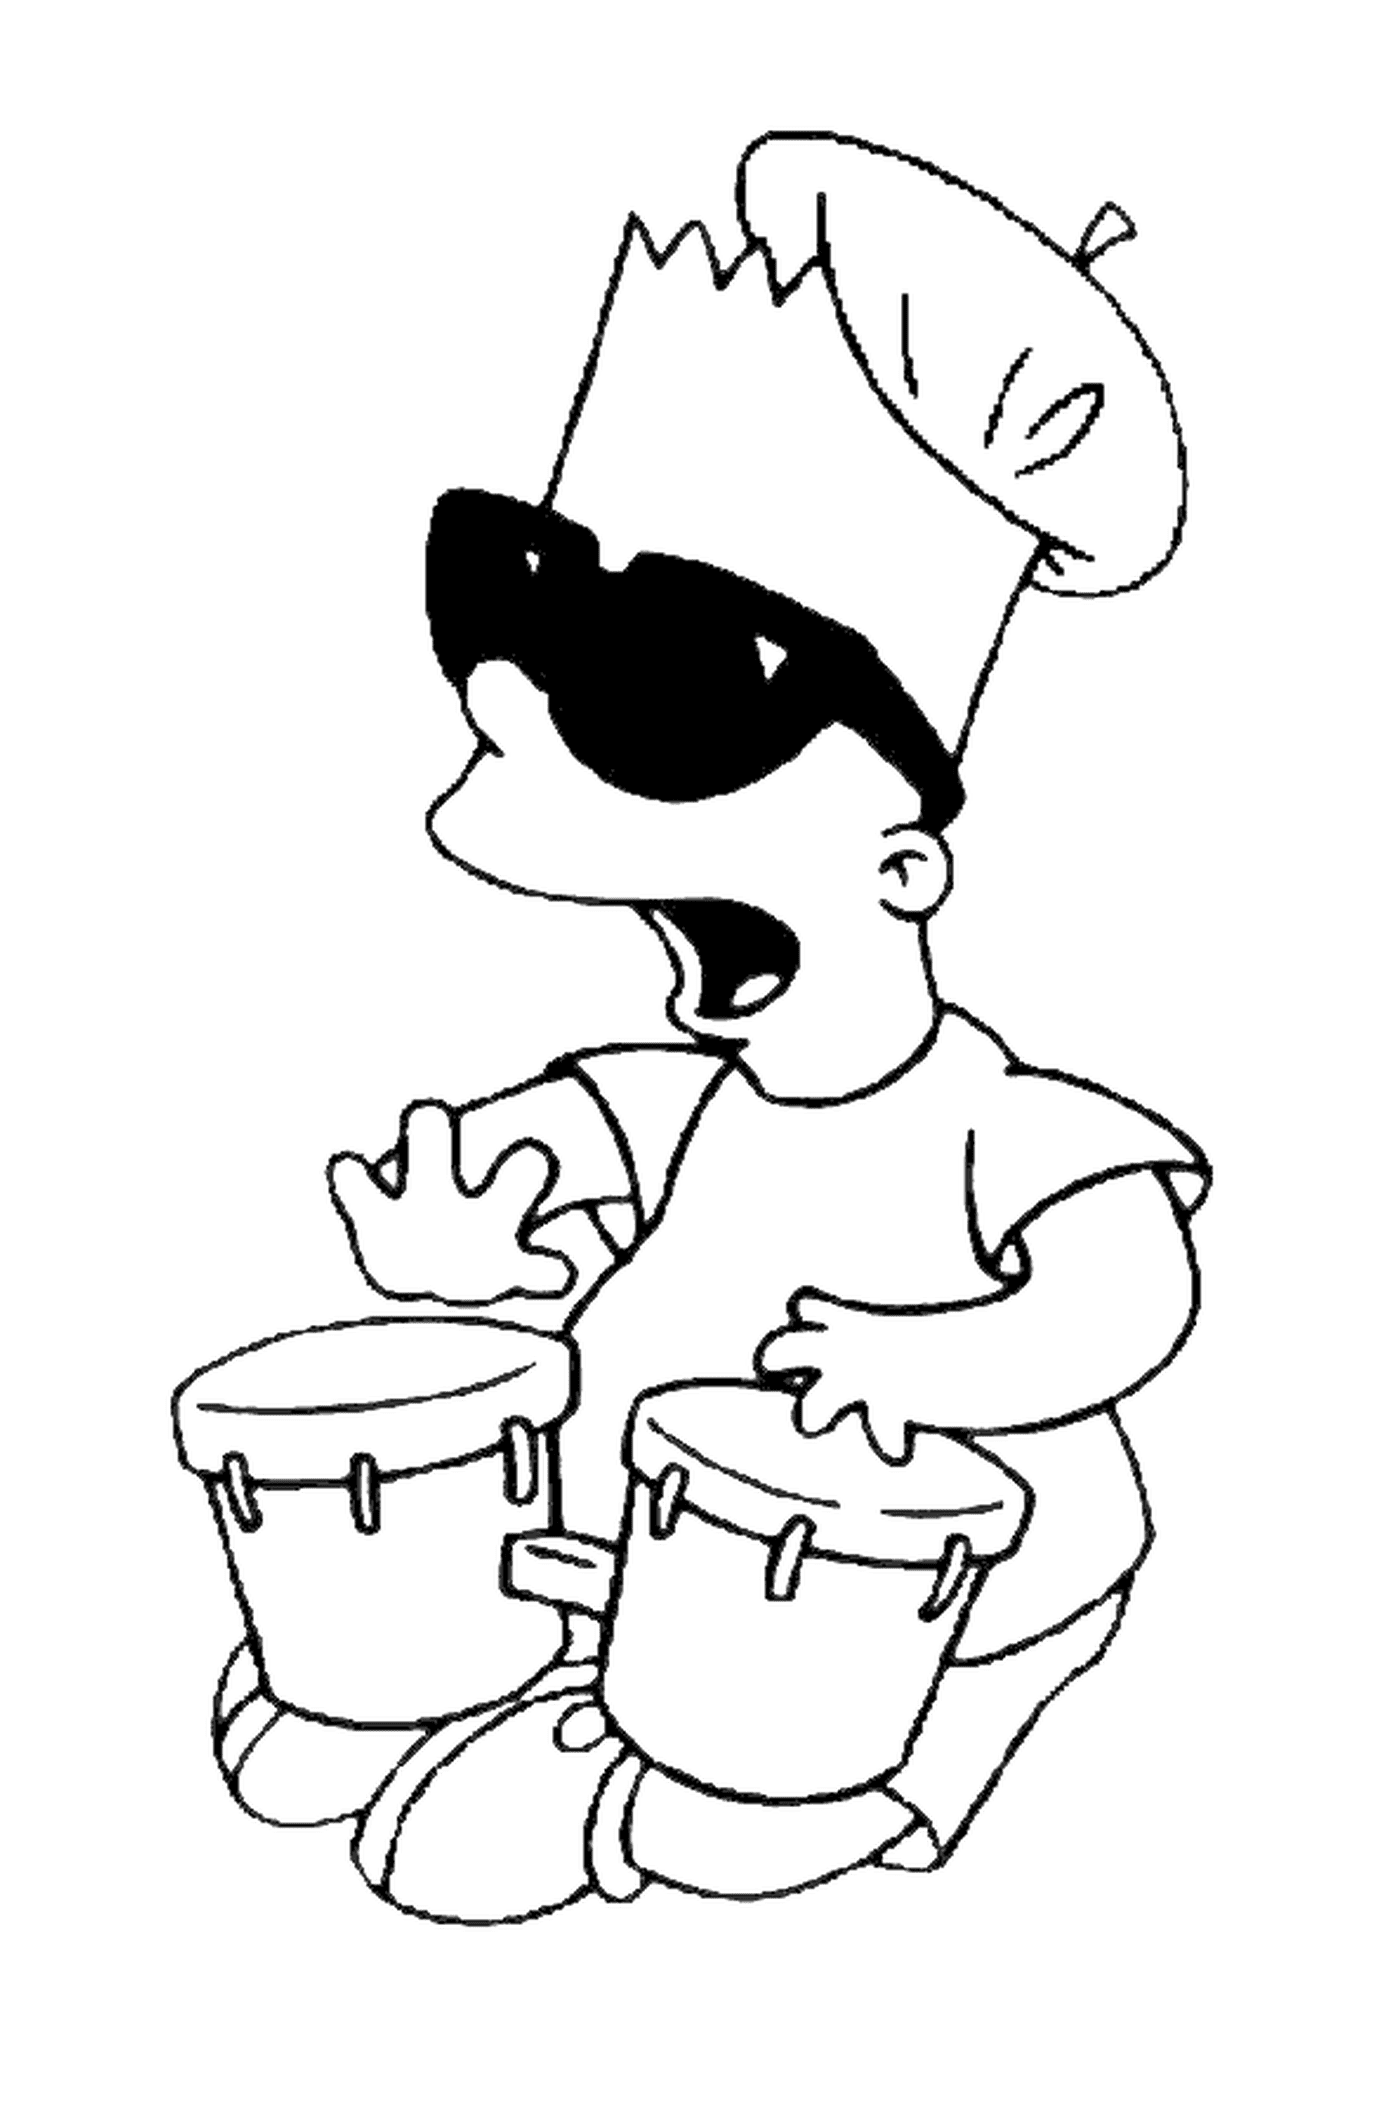  Bart makes music with tam-tams, no one playing an instrument 